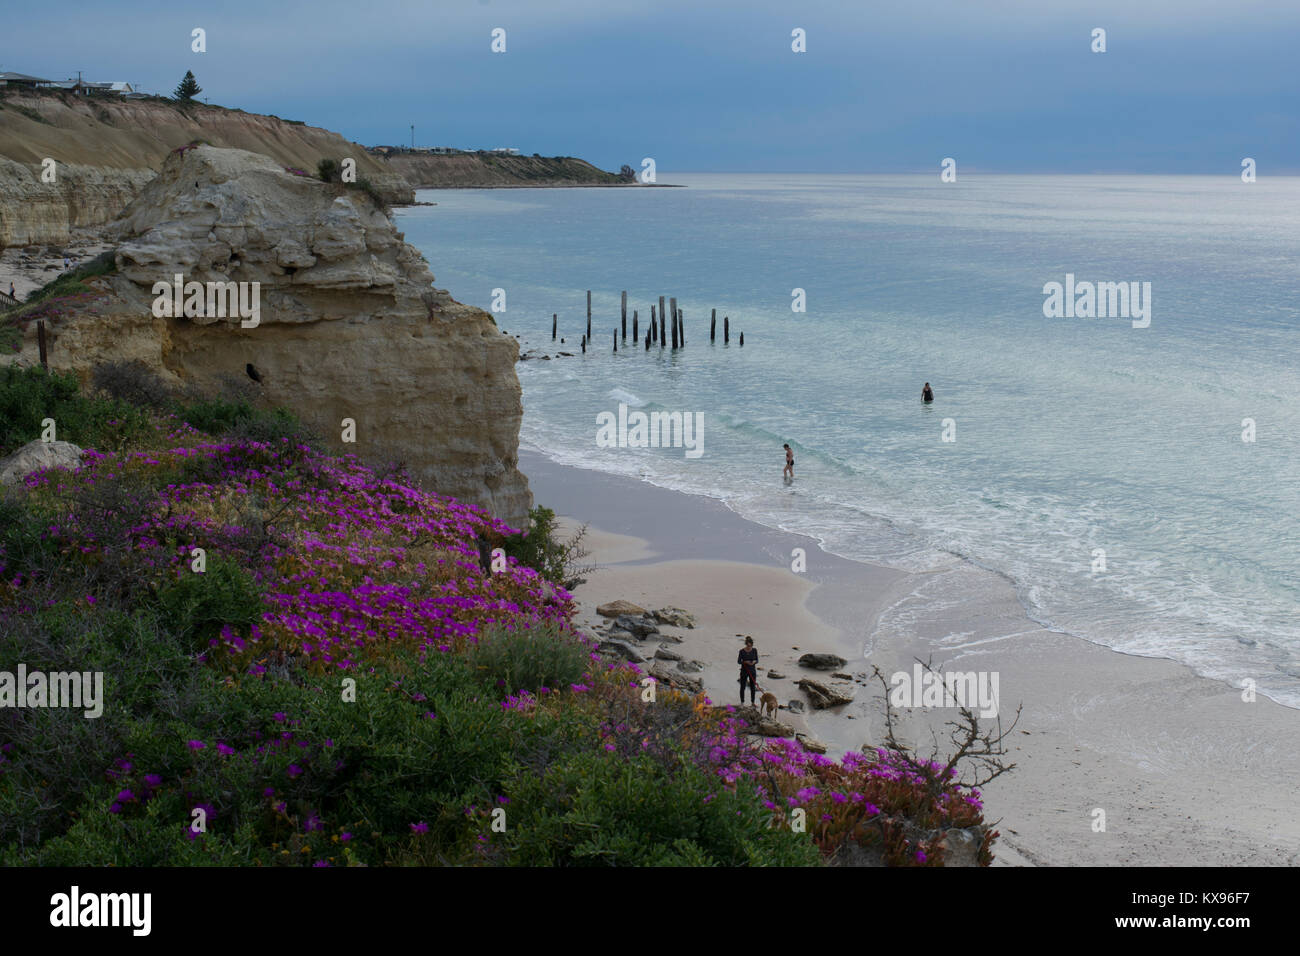 Port Willunga, South Australia, Australia - October 29, 2016: People swimming and a woman walking her dog on the beach at the jetty ruins at Port Will Stock Photo